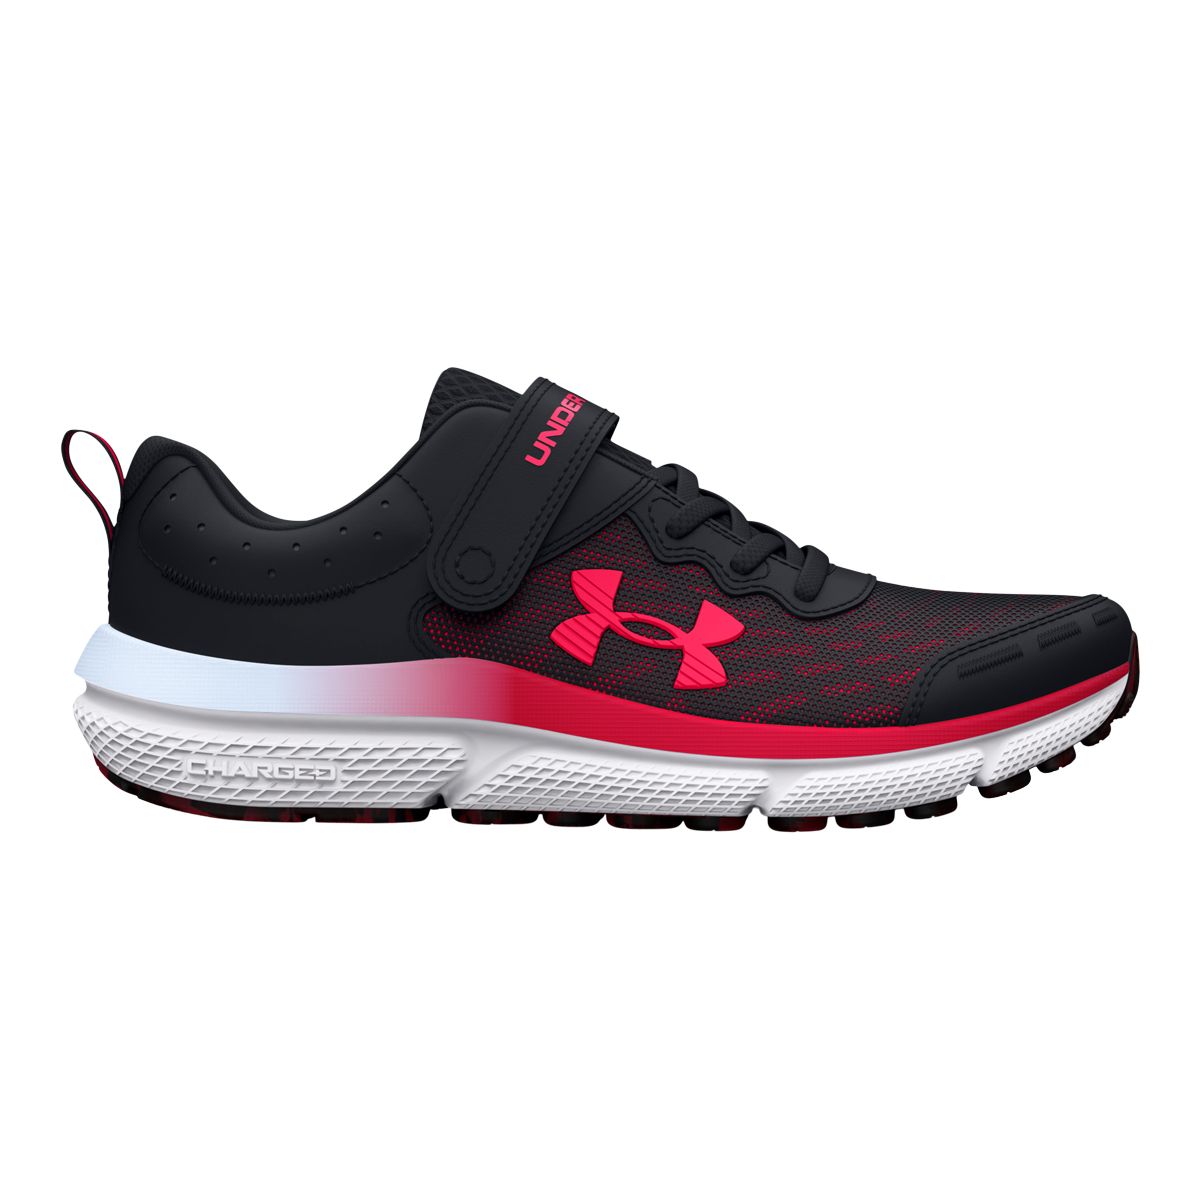 Under Armour Charged Rogue Athletic Running Shoes Women's Size US 10 Black  Pink